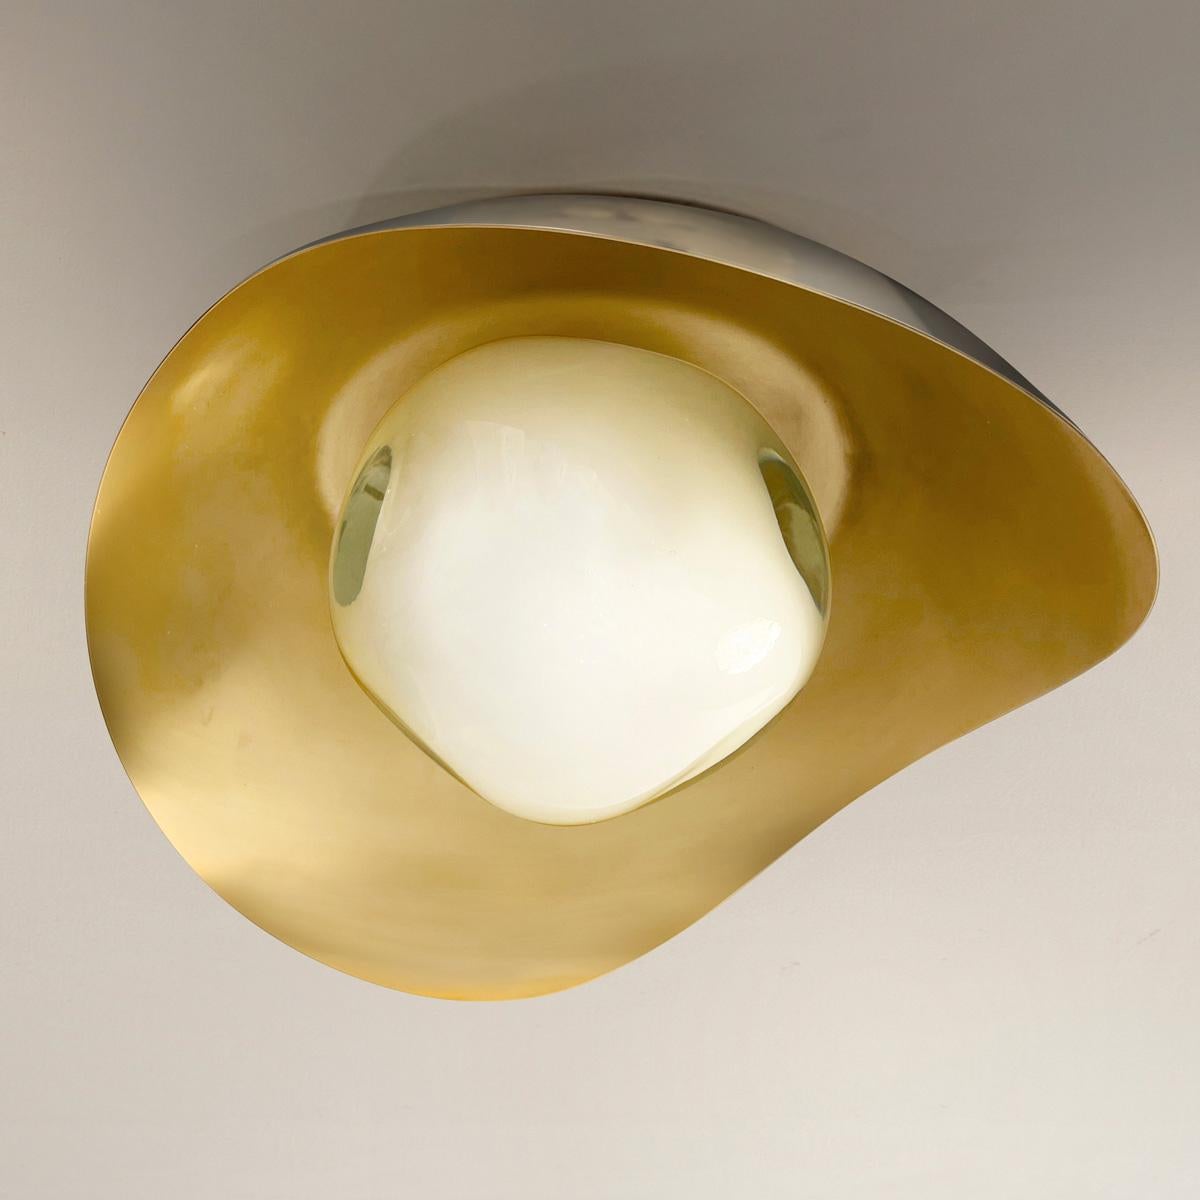 Perla Flushmount Ceiling Light by Gaspare Asaro-Satin Brass/Polished Nickel In New Condition For Sale In New York, NY